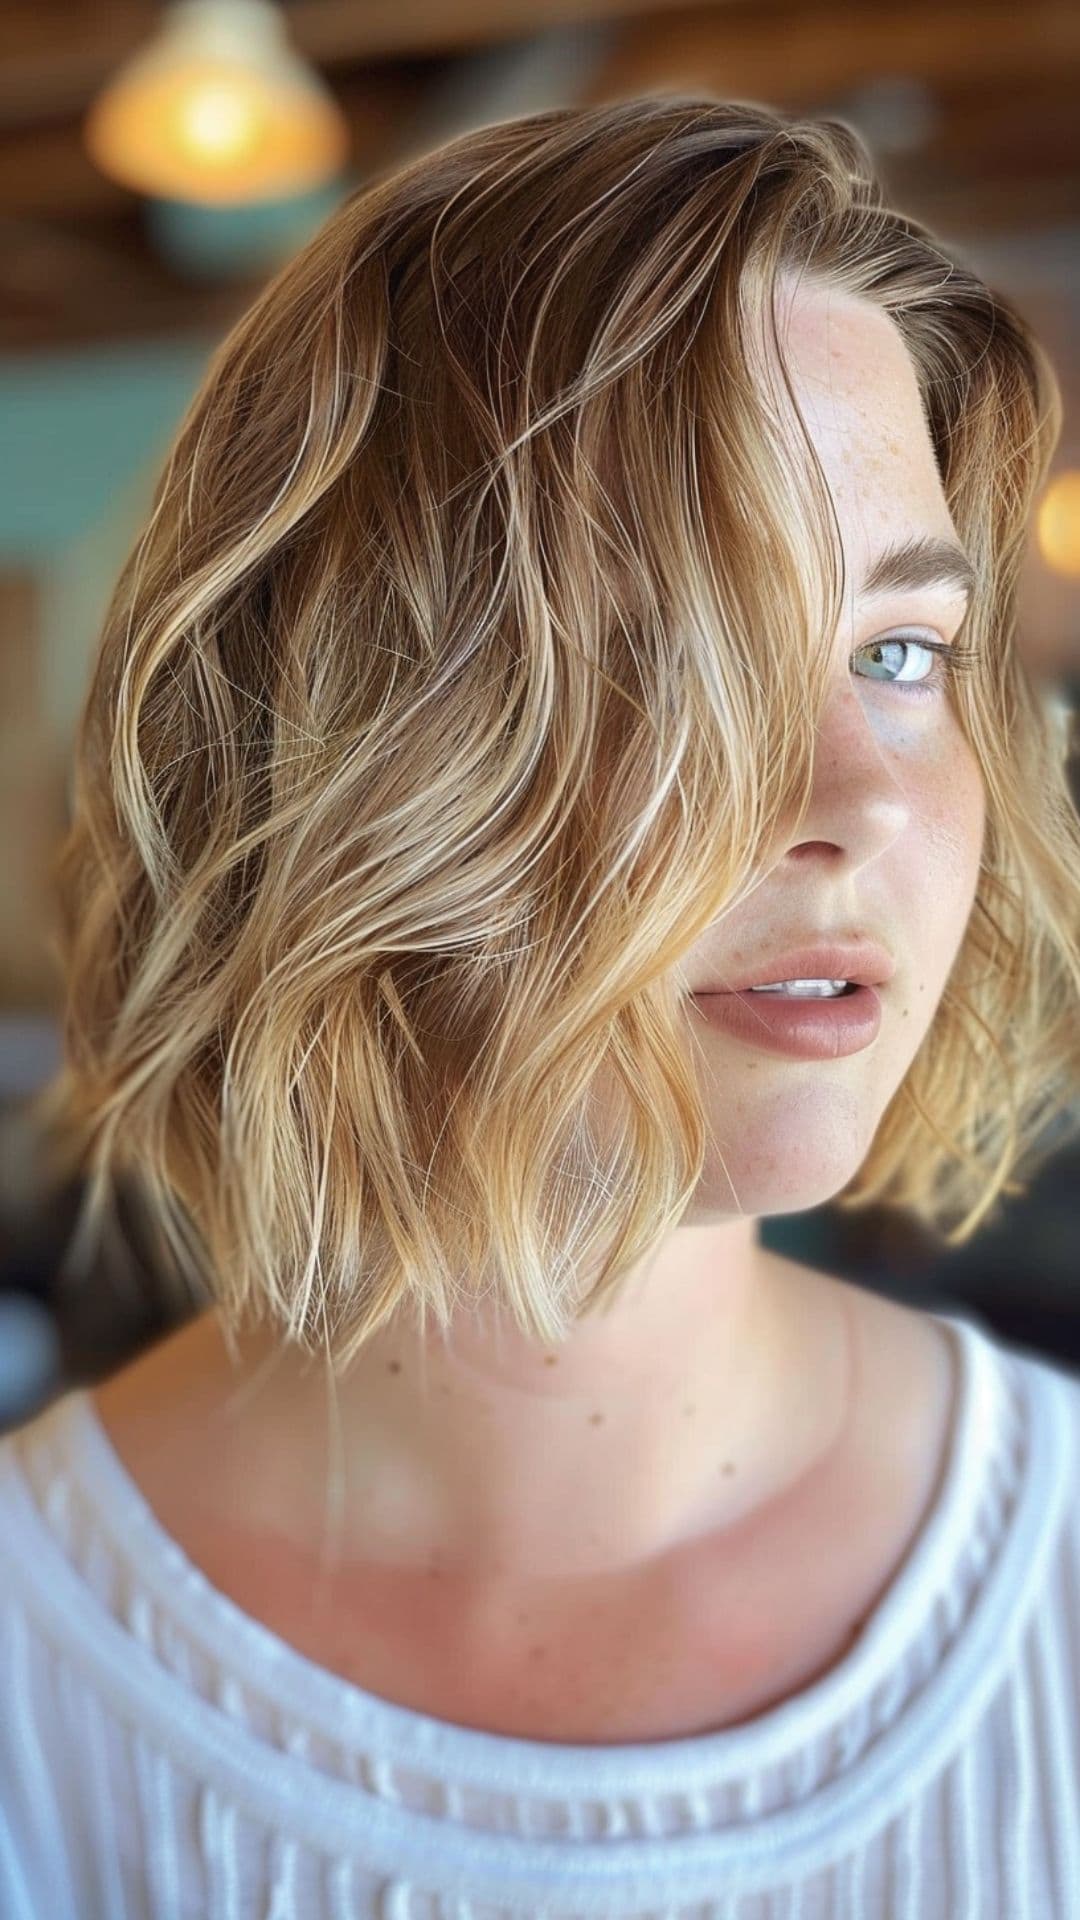 A woman modelling a textured bob with beachy waves.